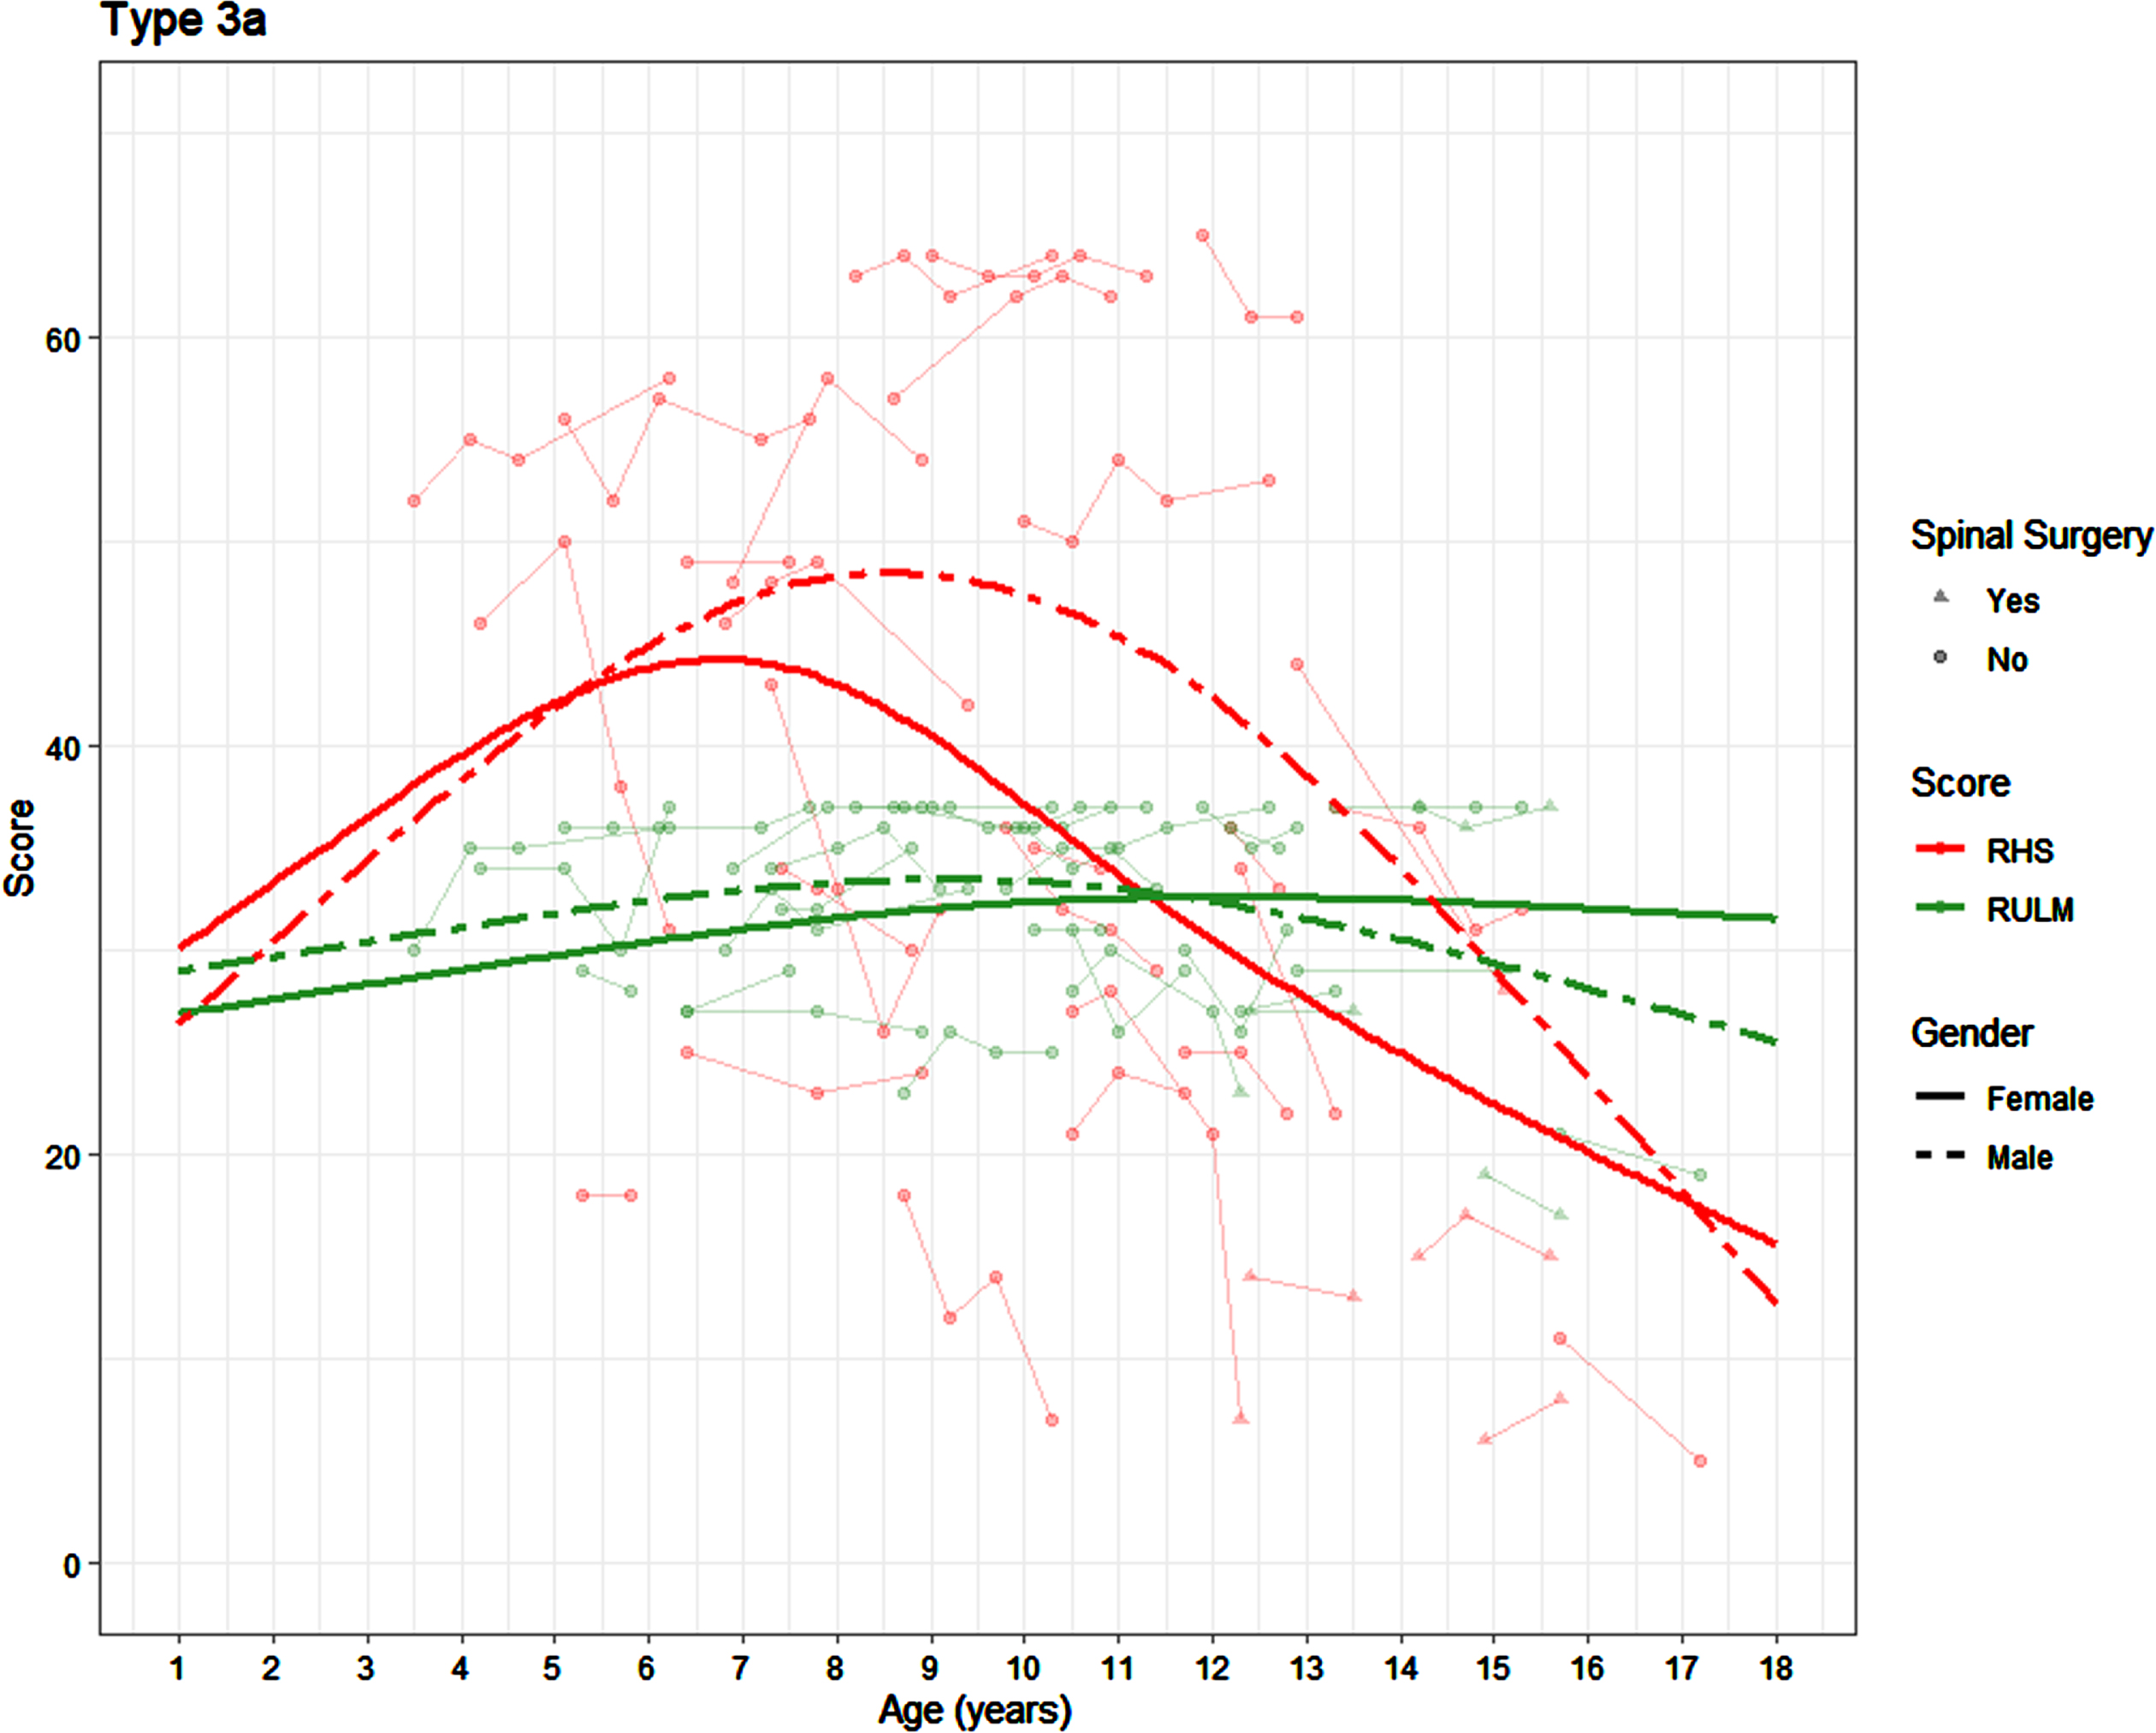 Average SMA 3a trajectories on the RHS and RULM by age and sex (average presented for participants who have not undergone scoliosis surgery).